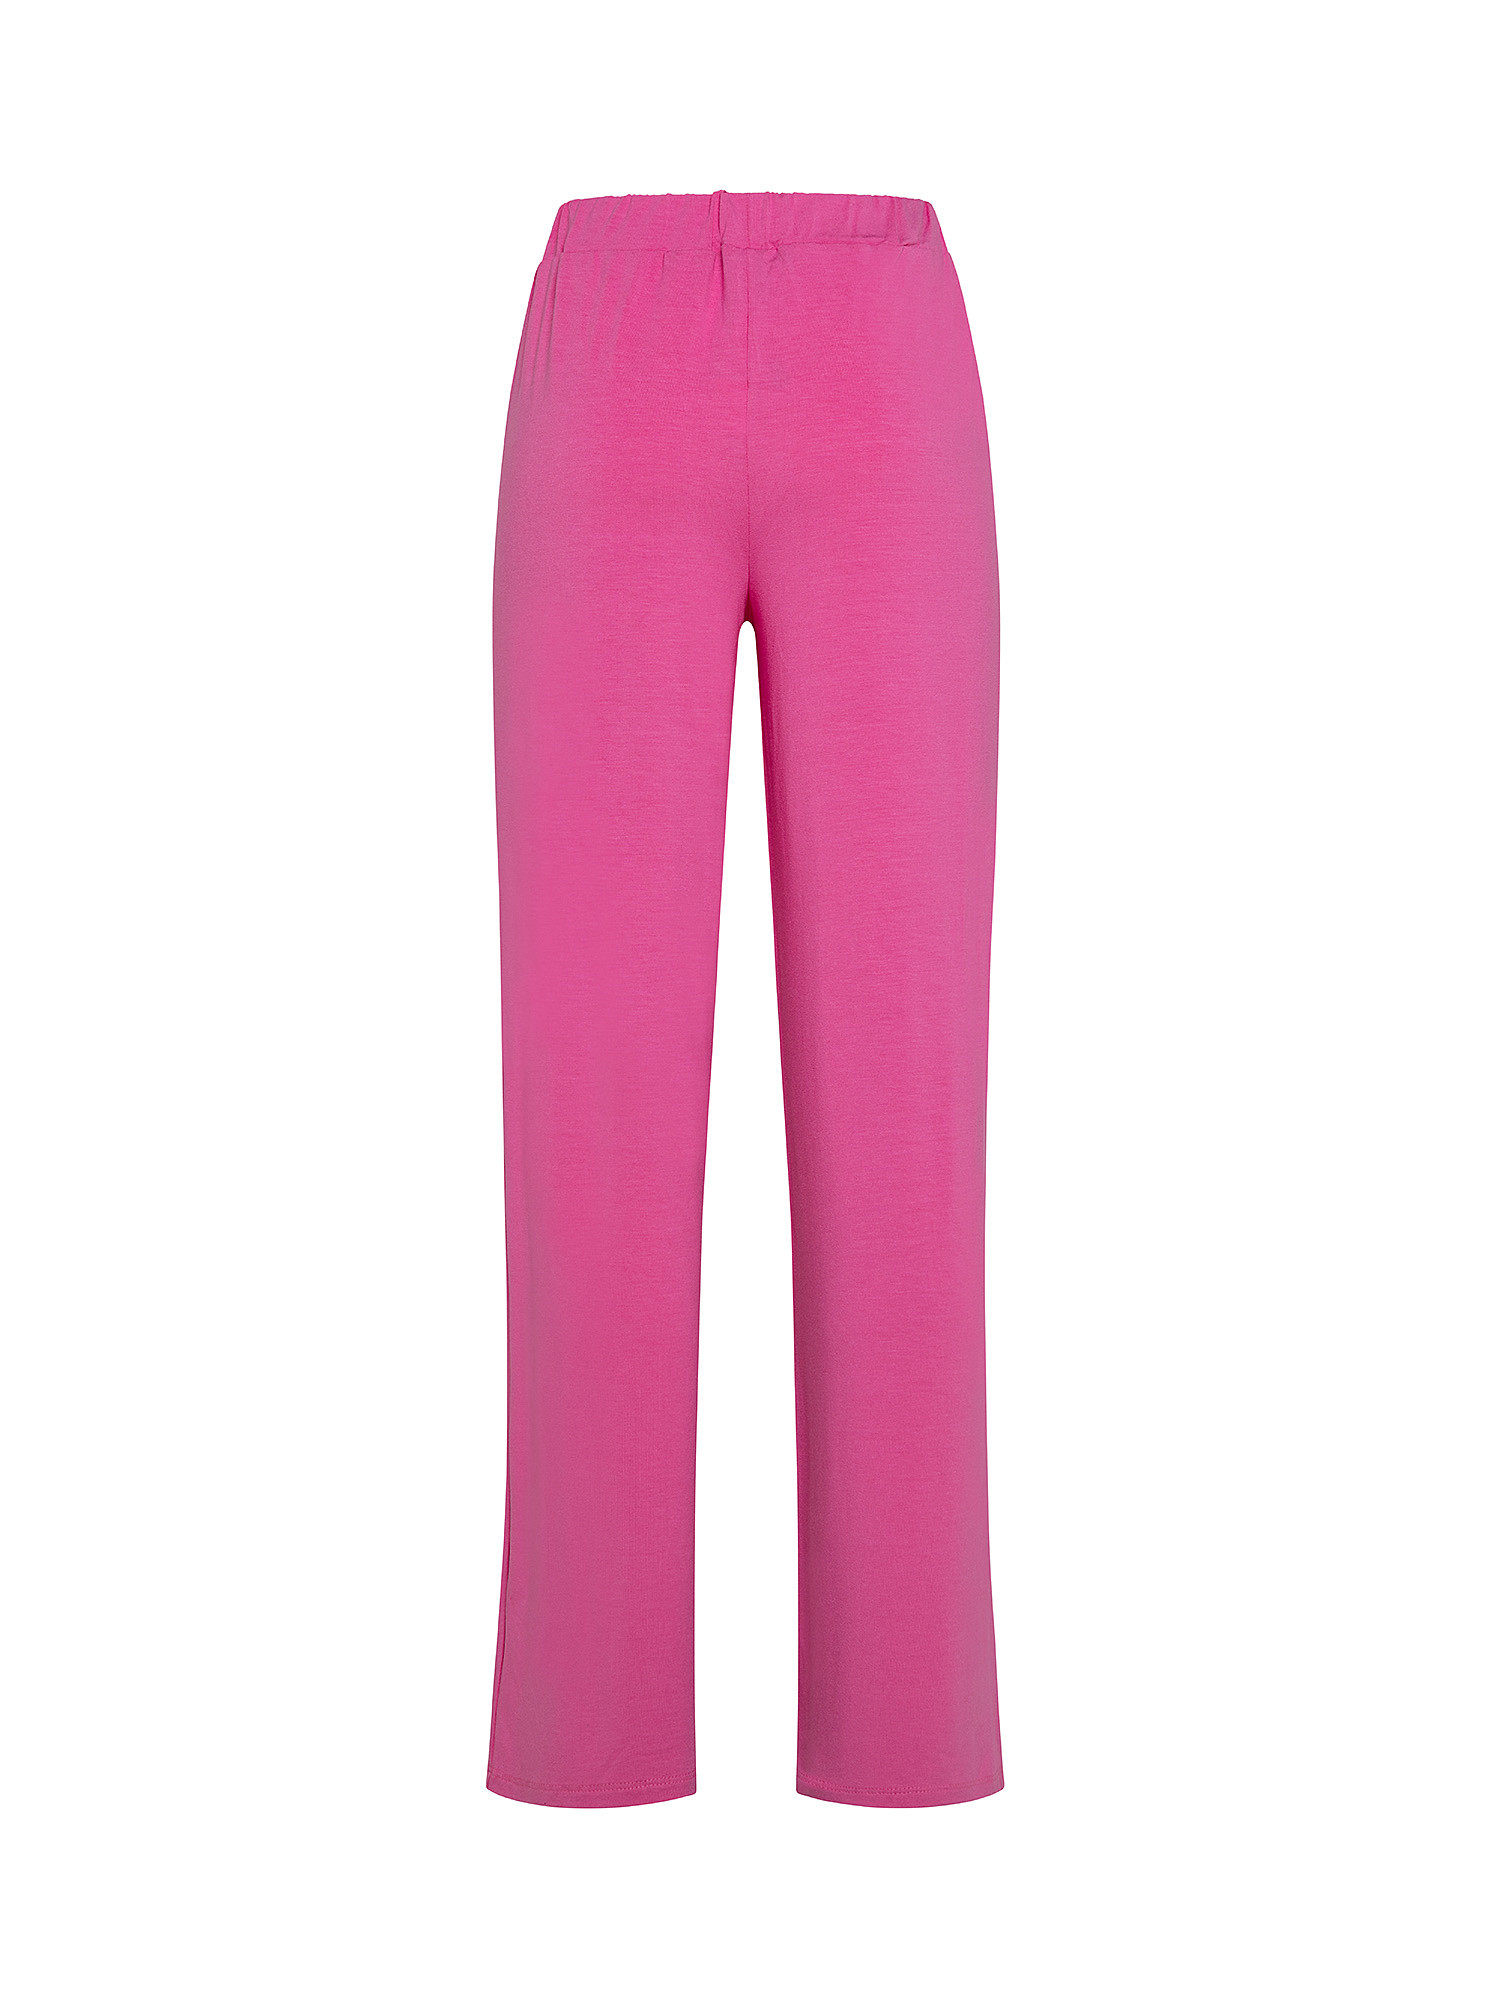 Wide leg trousers, Pink Fuchsia, large image number 1